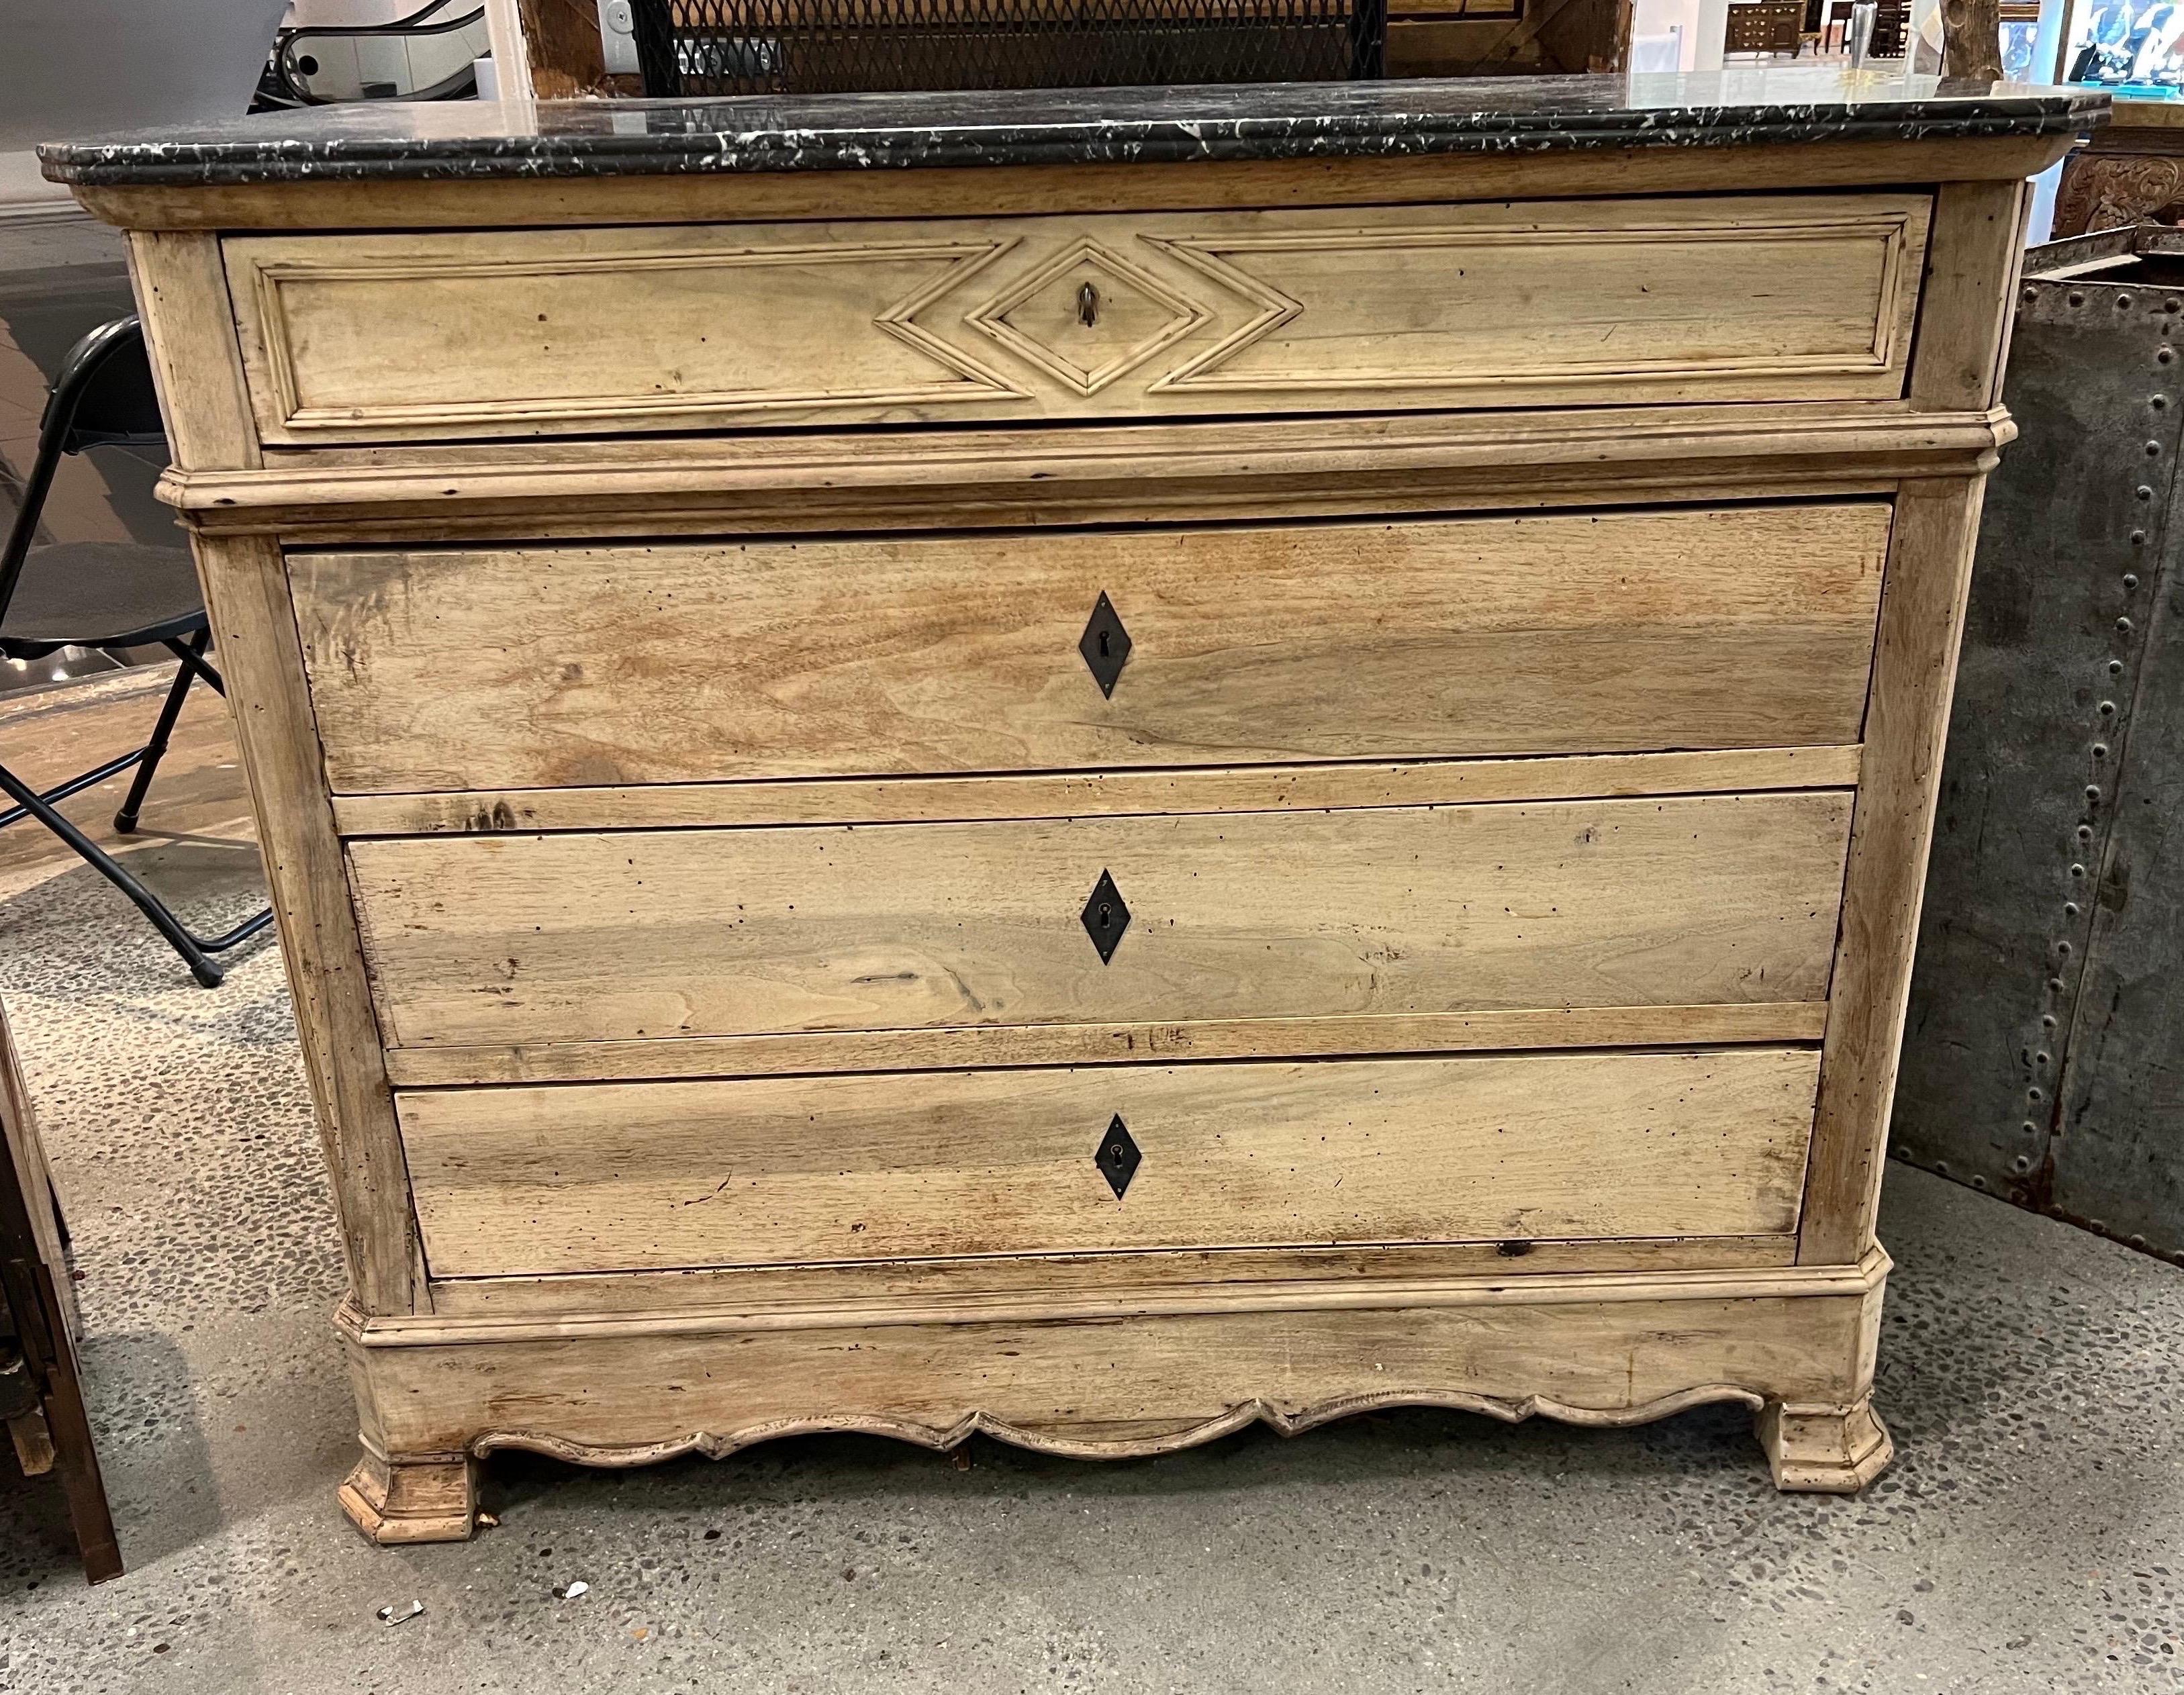 19th century French bleached marble top chest of drawers with diamond shaped molding decoration and diamond shaped eschuteons. The original dark marble top contrasts well with the light color bleached walnut.